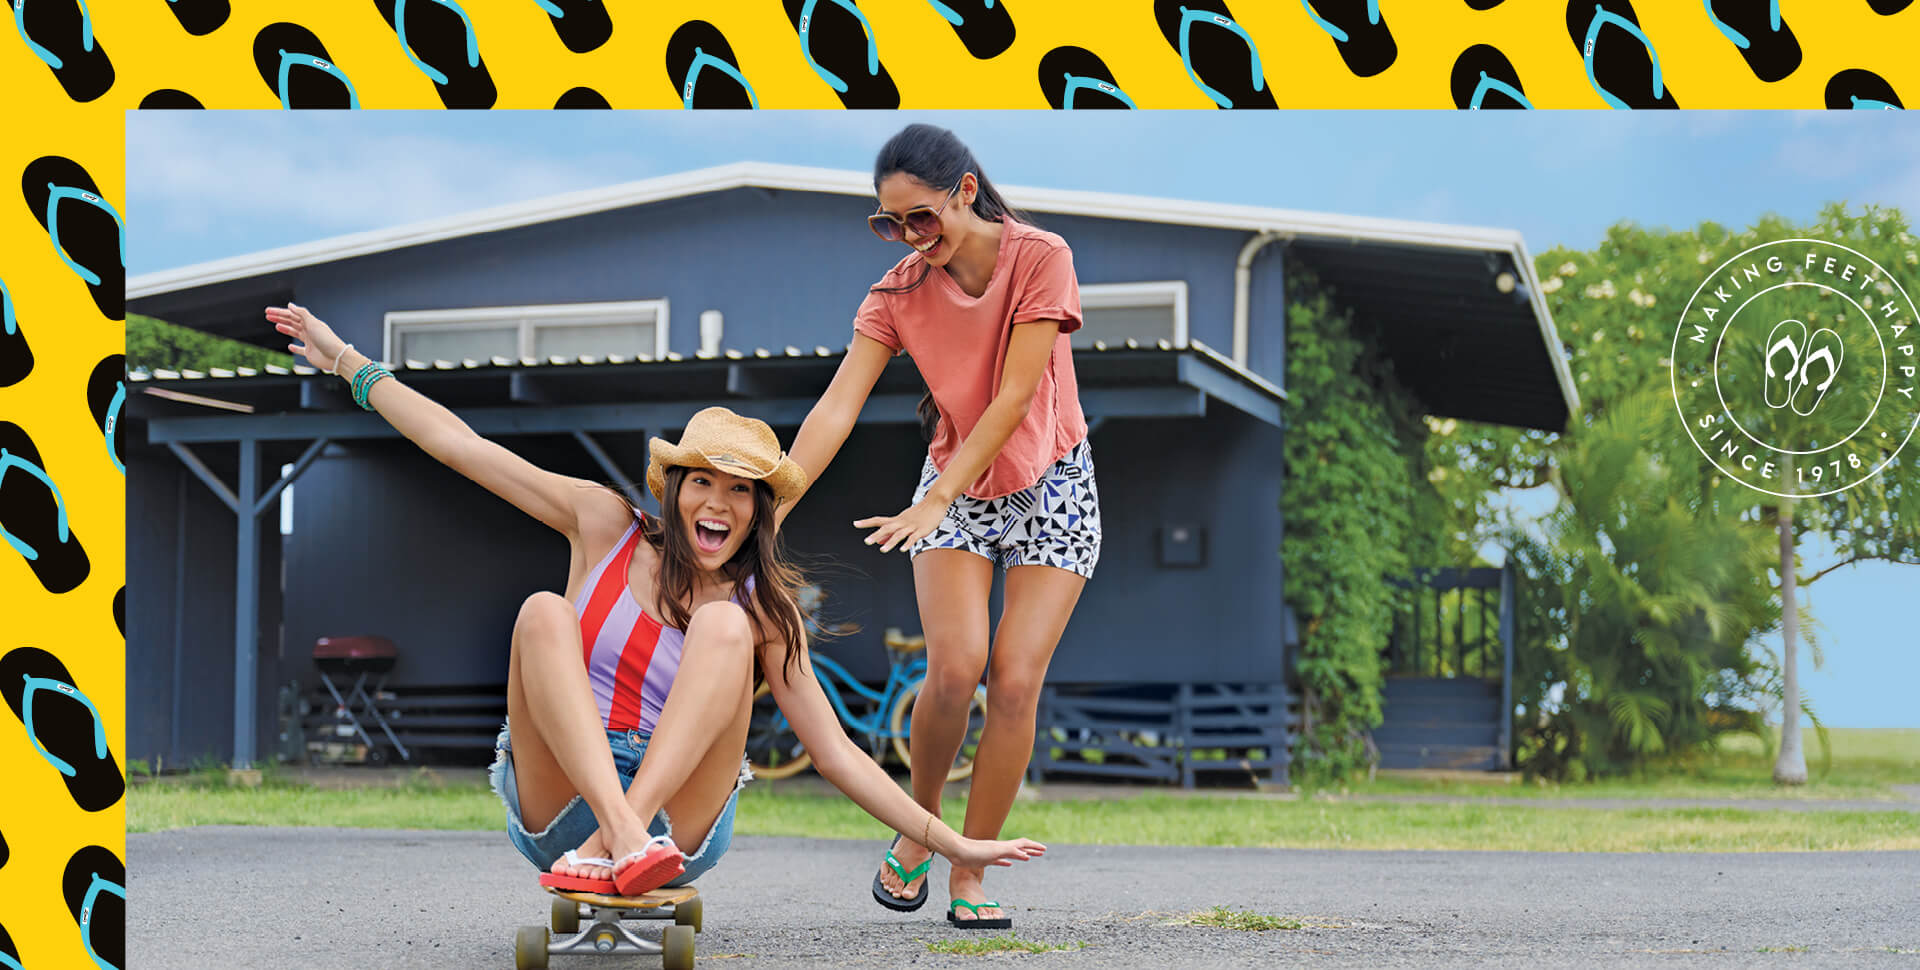 Two women playing on a skateboard wearing Locals slippahs